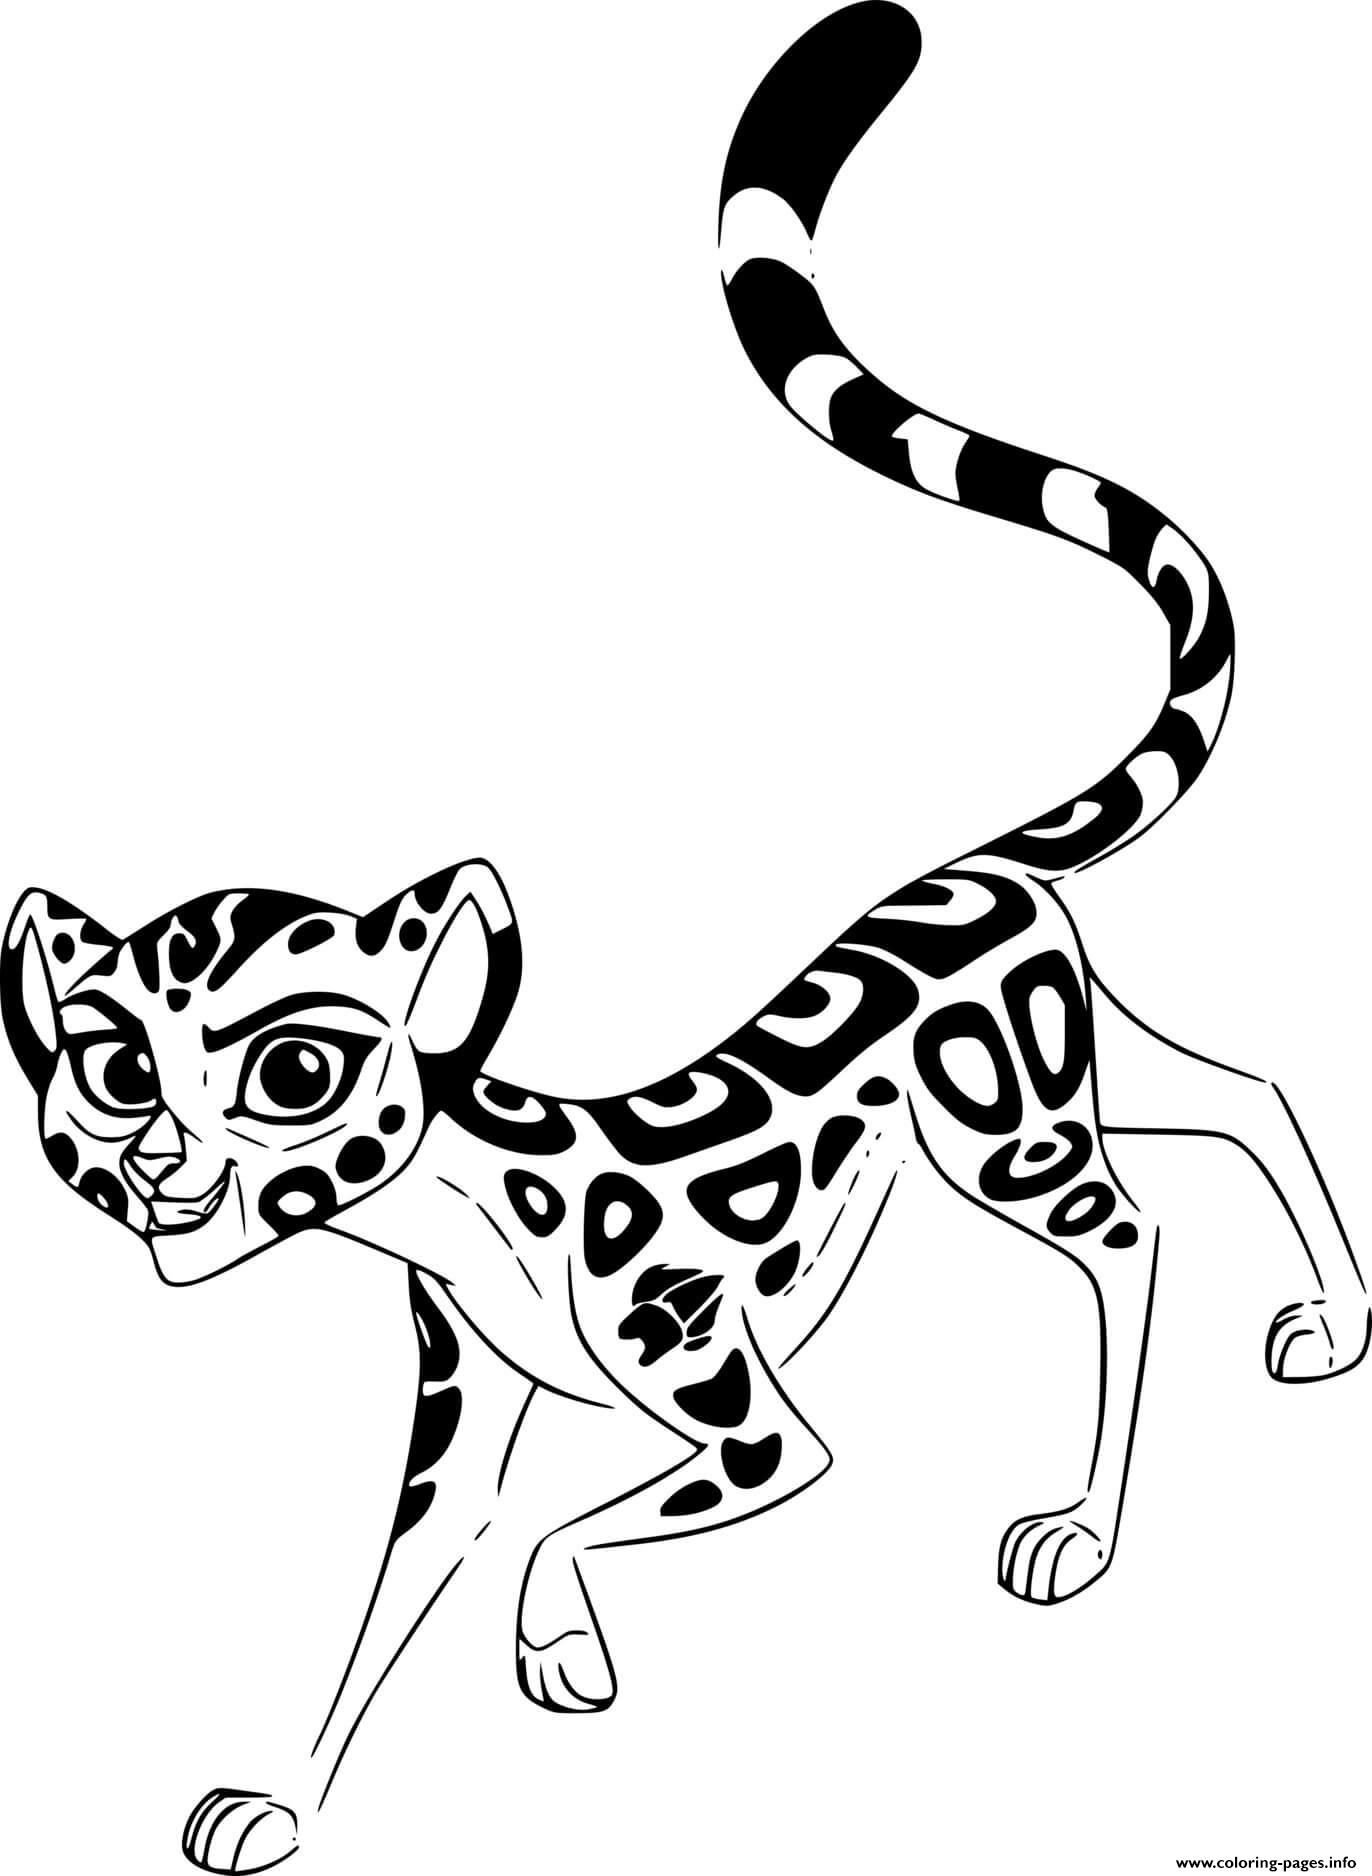 Fuli Running coloring pages